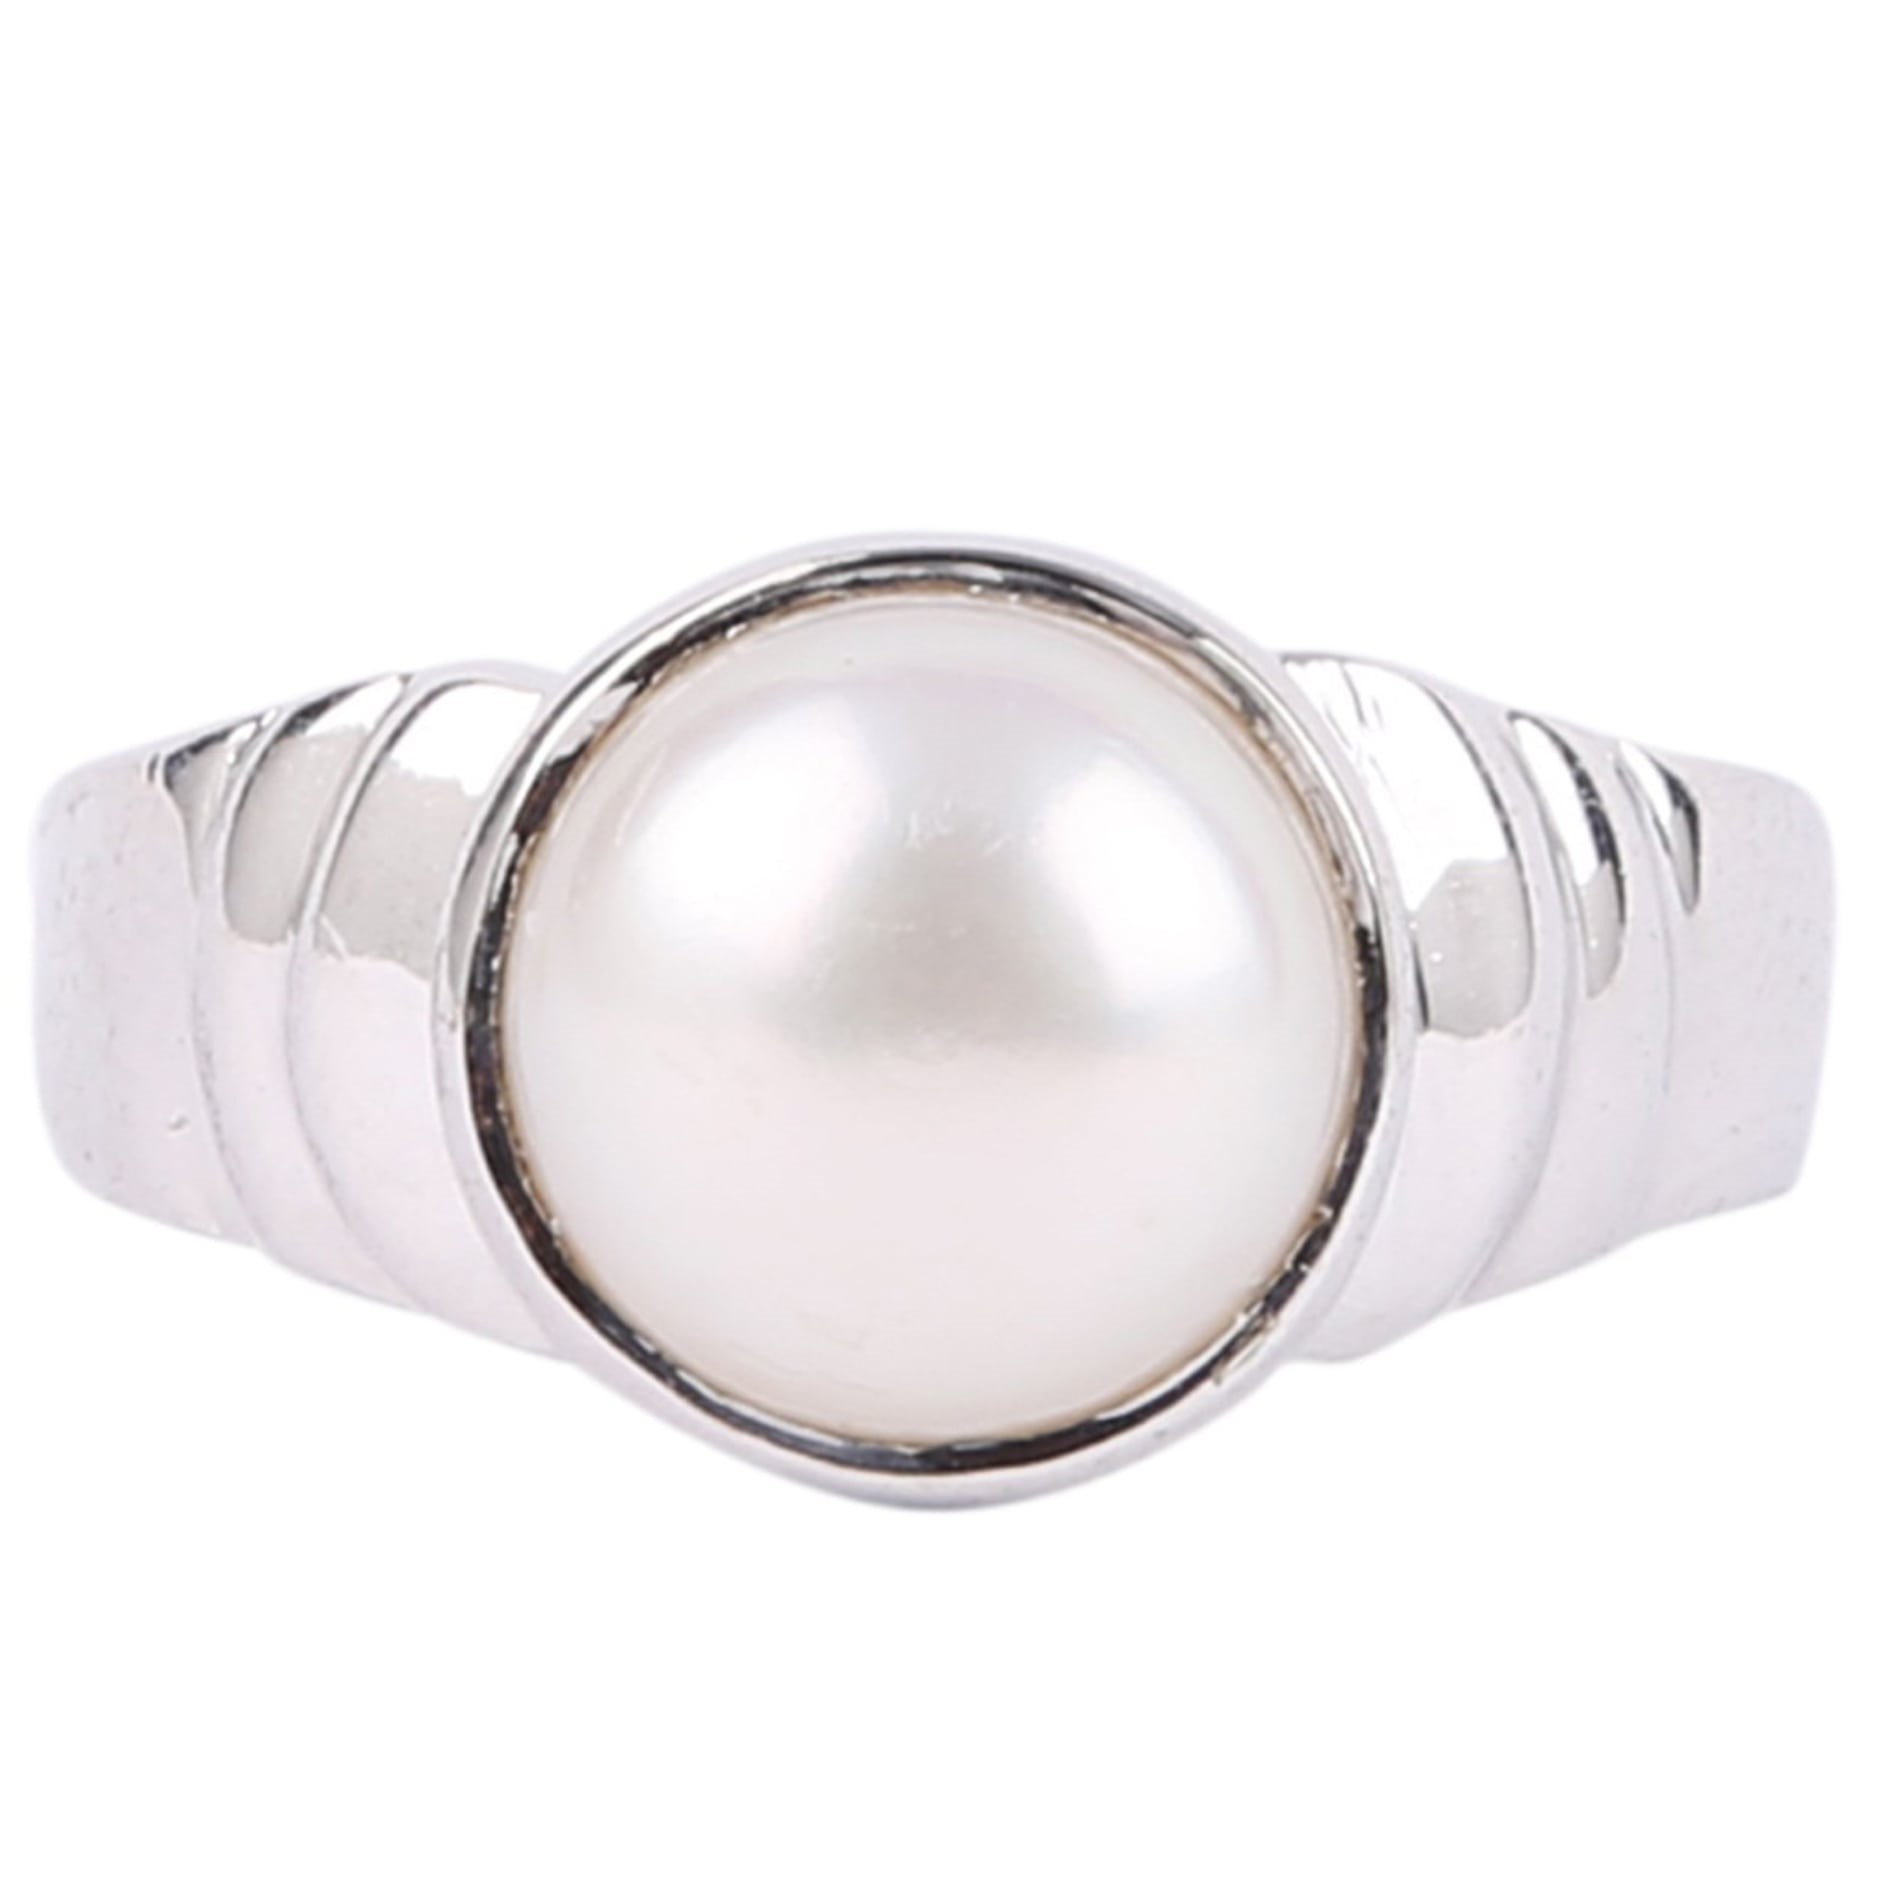 Freshwater Pearl Cuff Ring 012t – The Jewelry Junkie